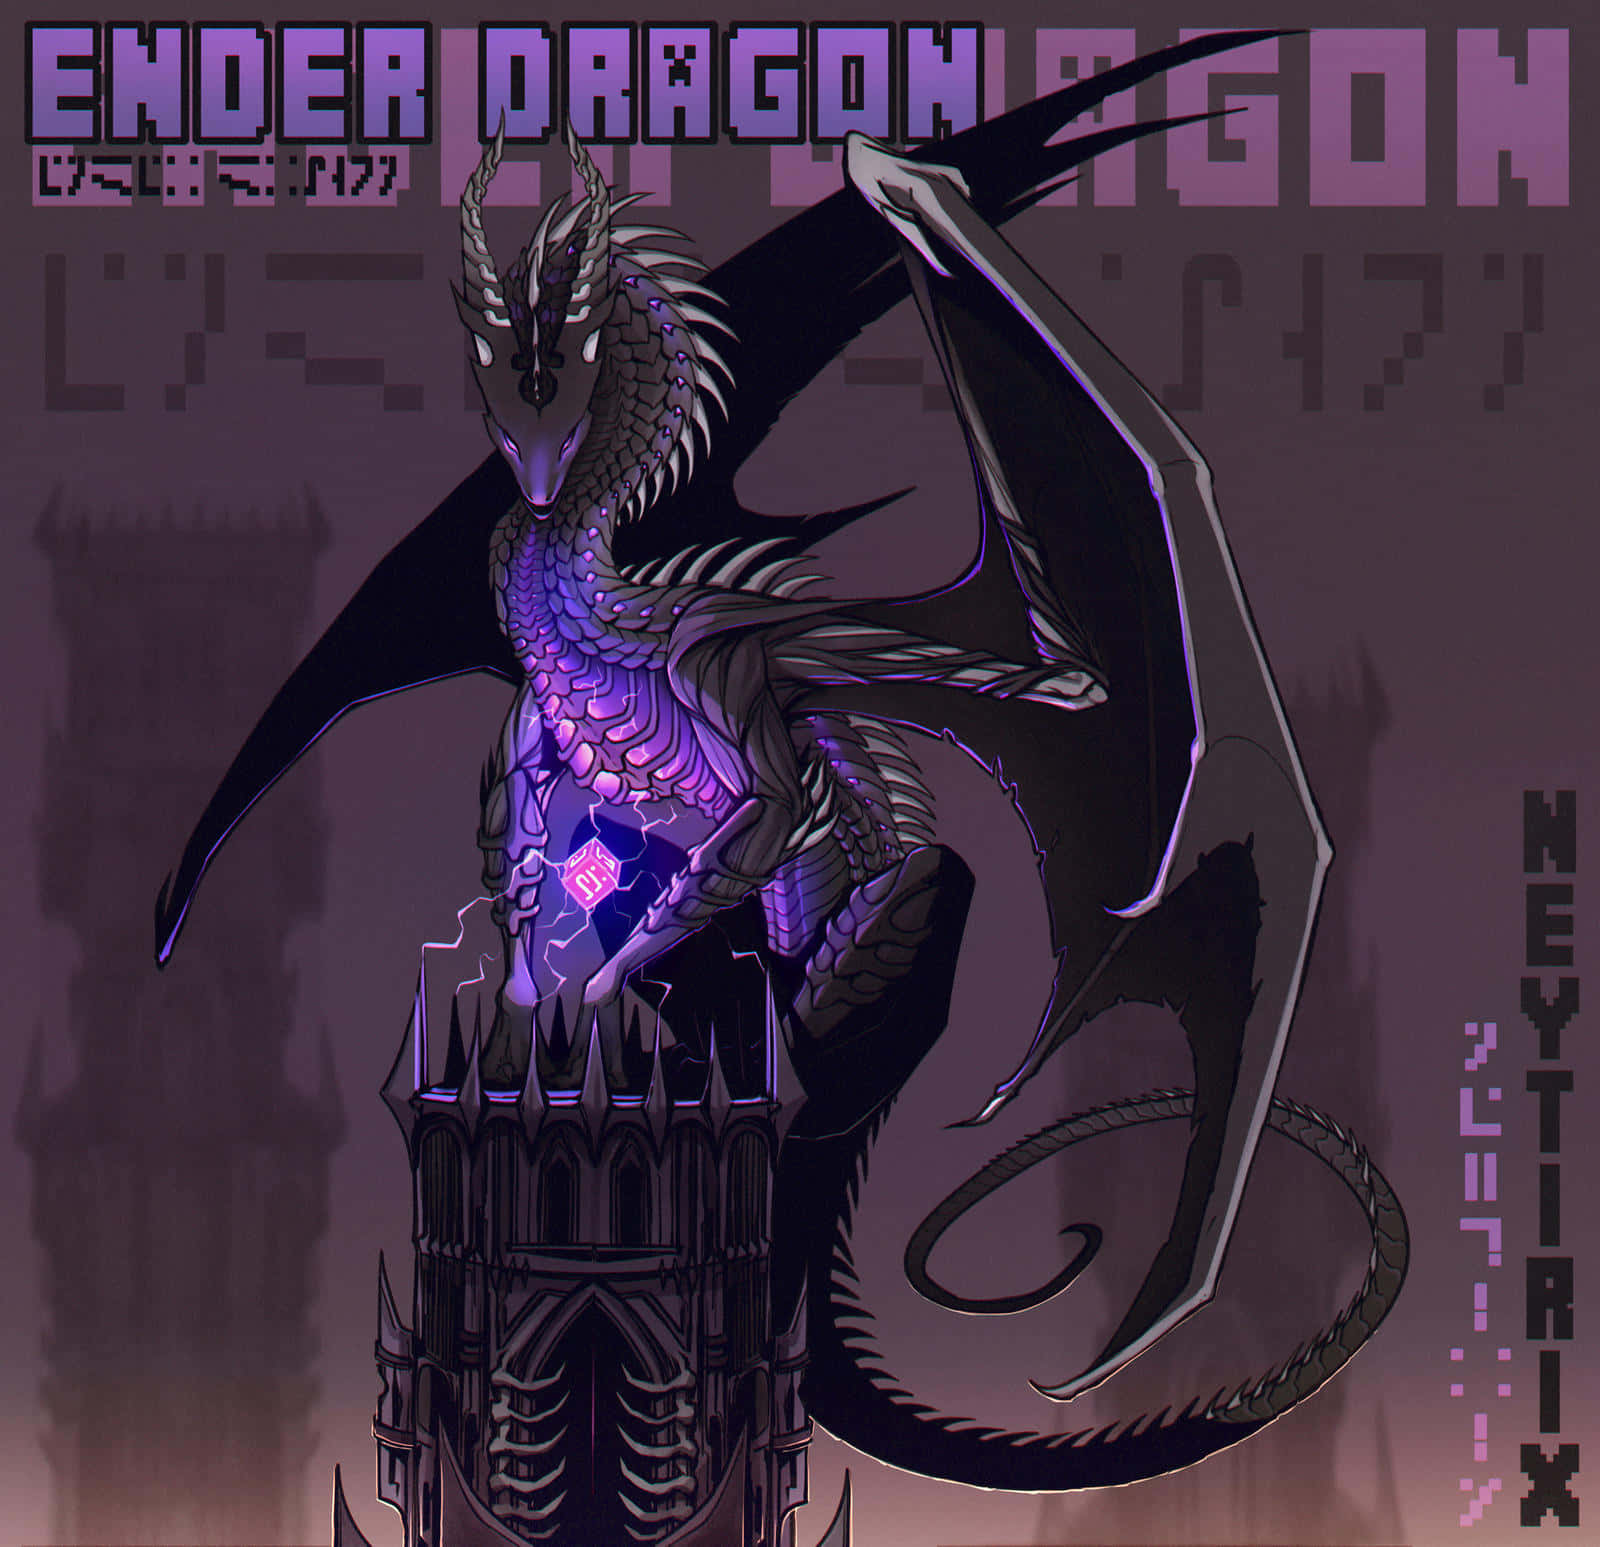 The legendary Ender Dragon from the game Minecraft